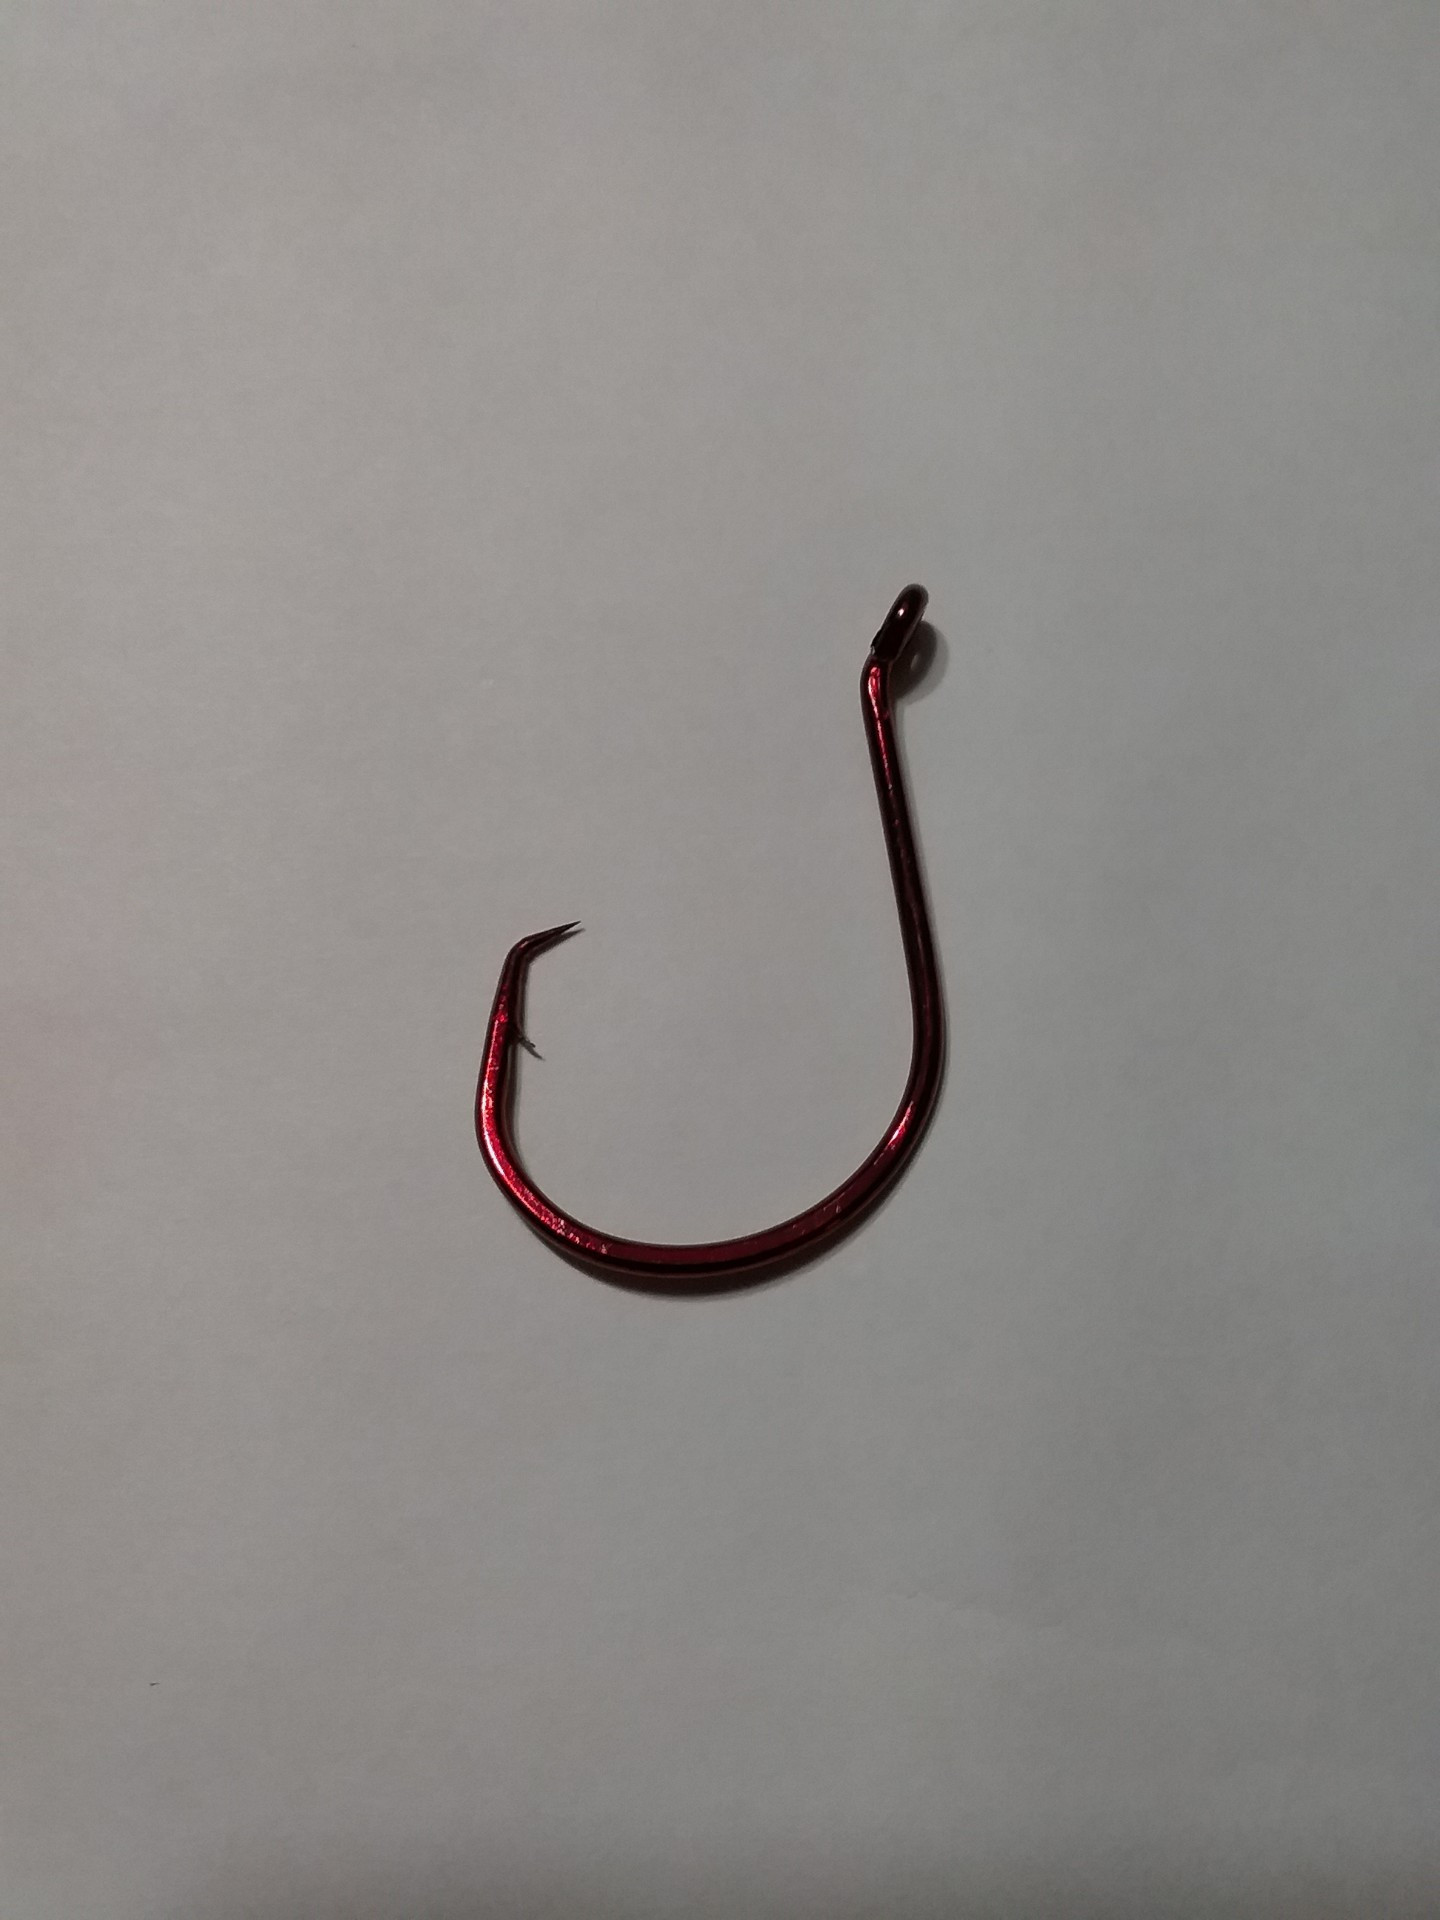 CatMaster Tackle Siluro Circle Hooks - Barbed